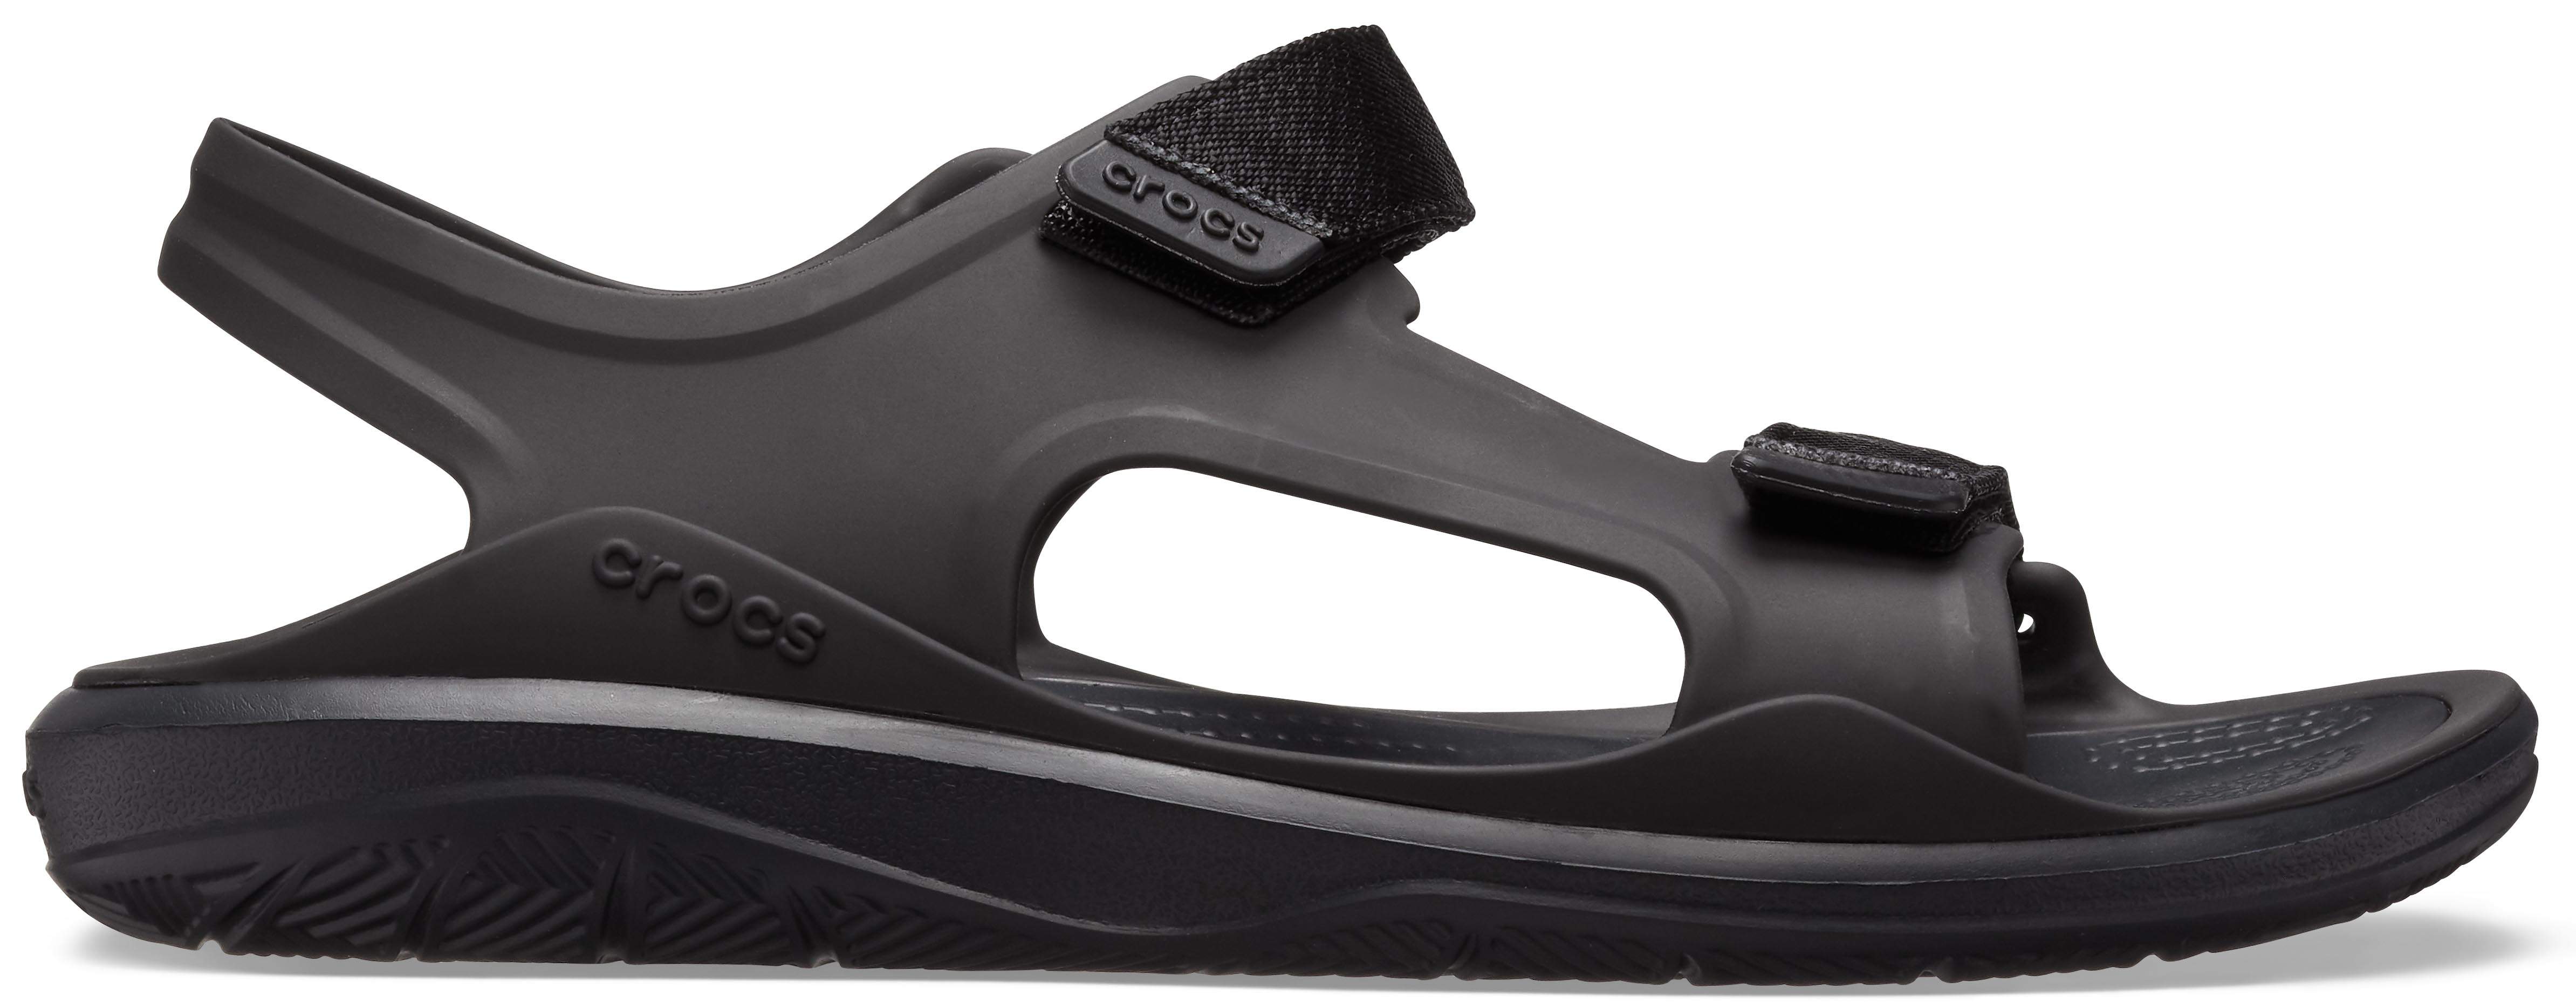 crocs swiftwater sandal review